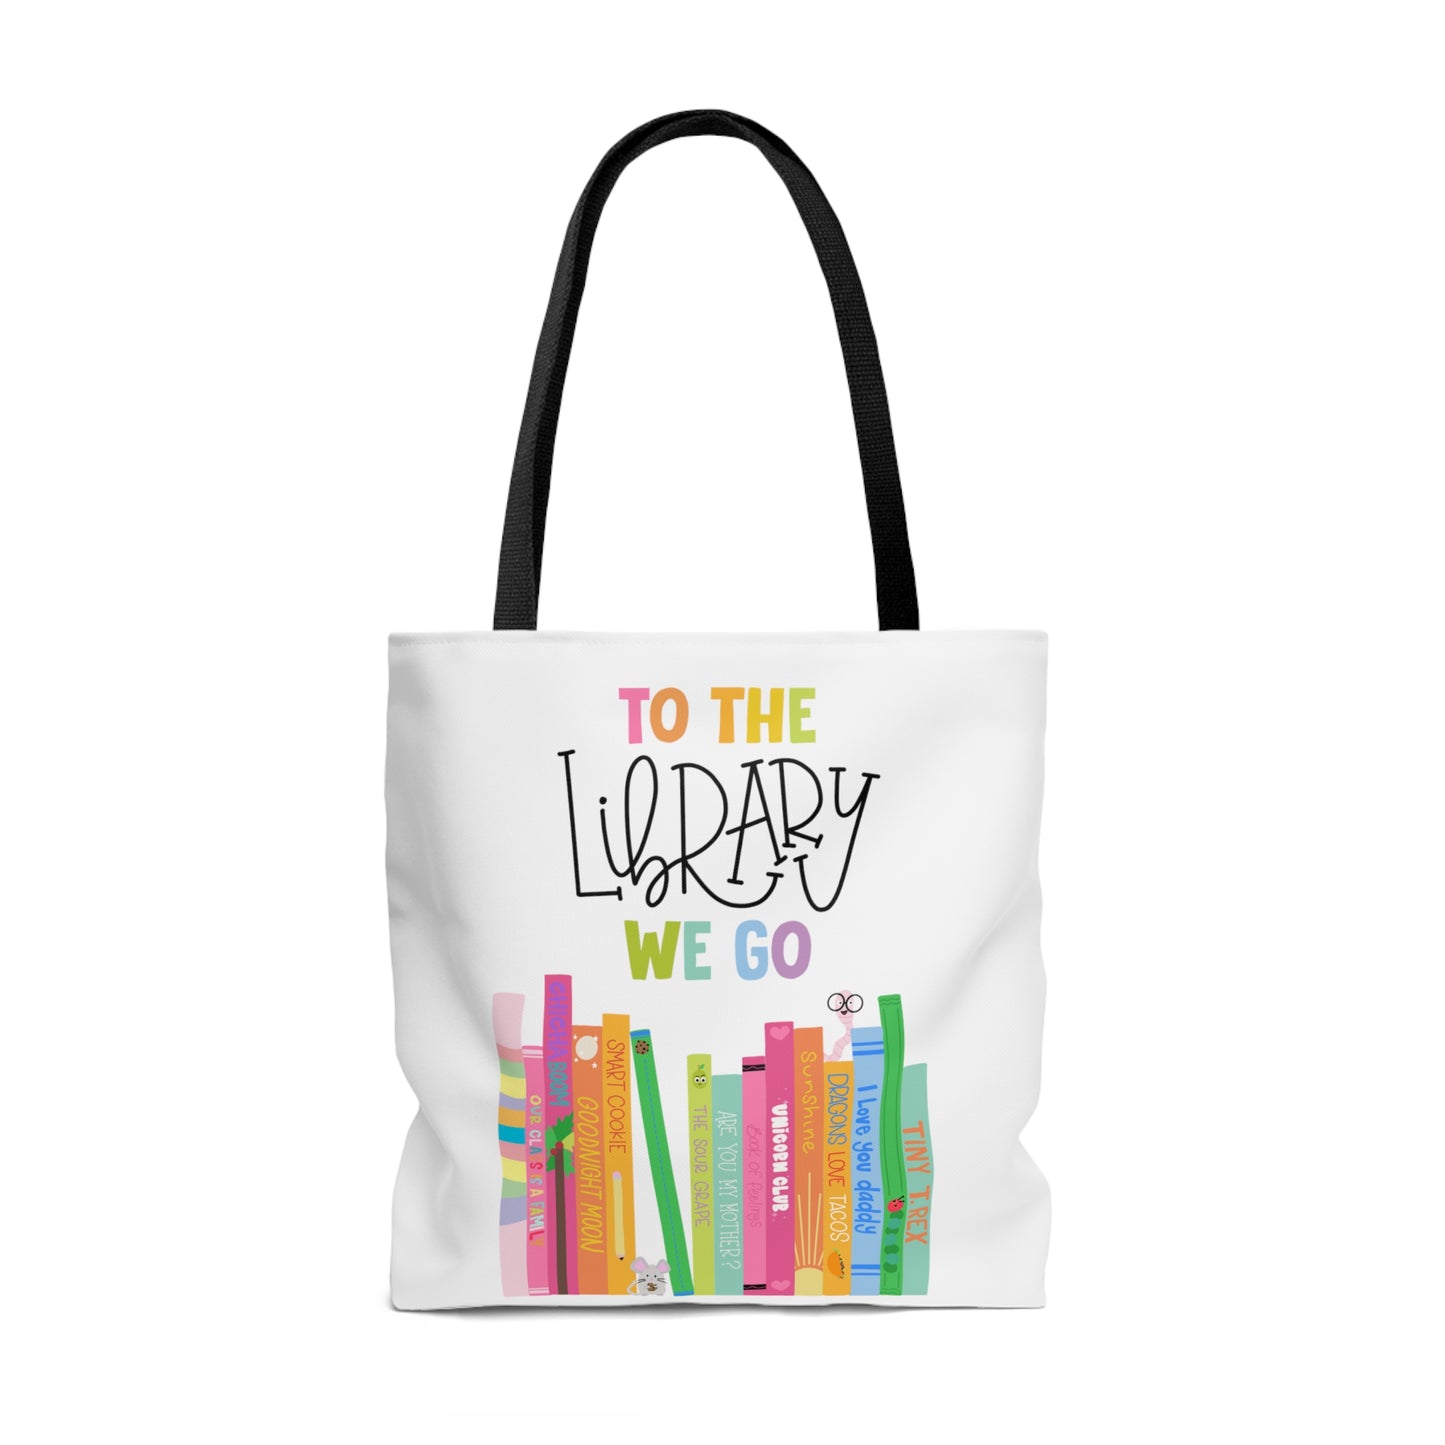 Library Tote Bag